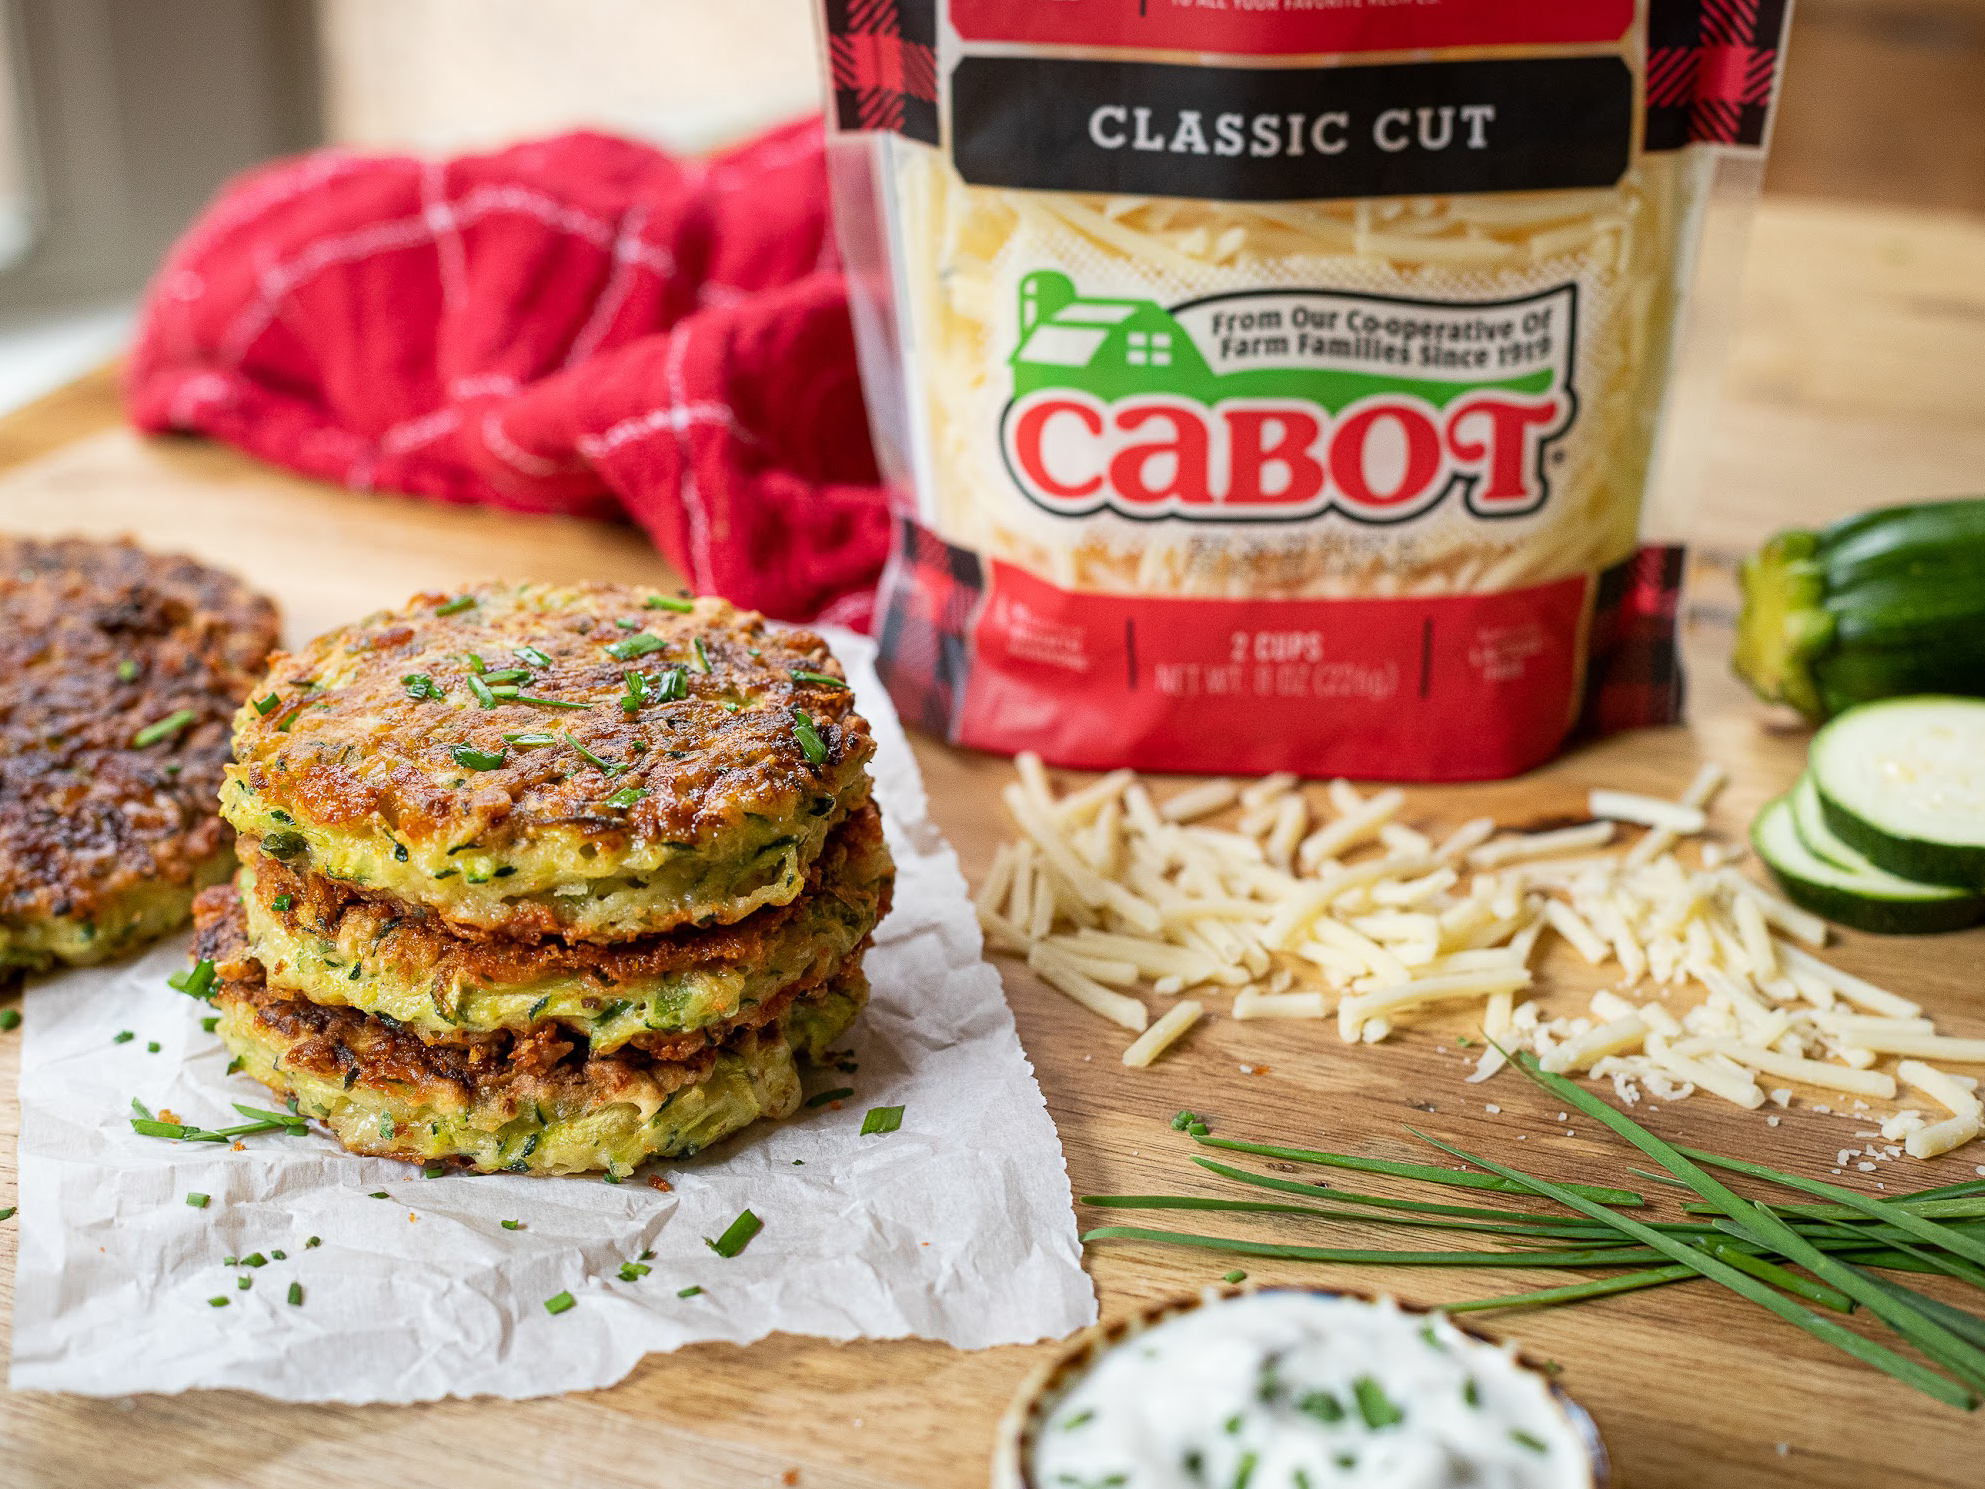 New At Publix – Cabot Shredded Cheese! On Sale Buy One, Get One Free At Publix